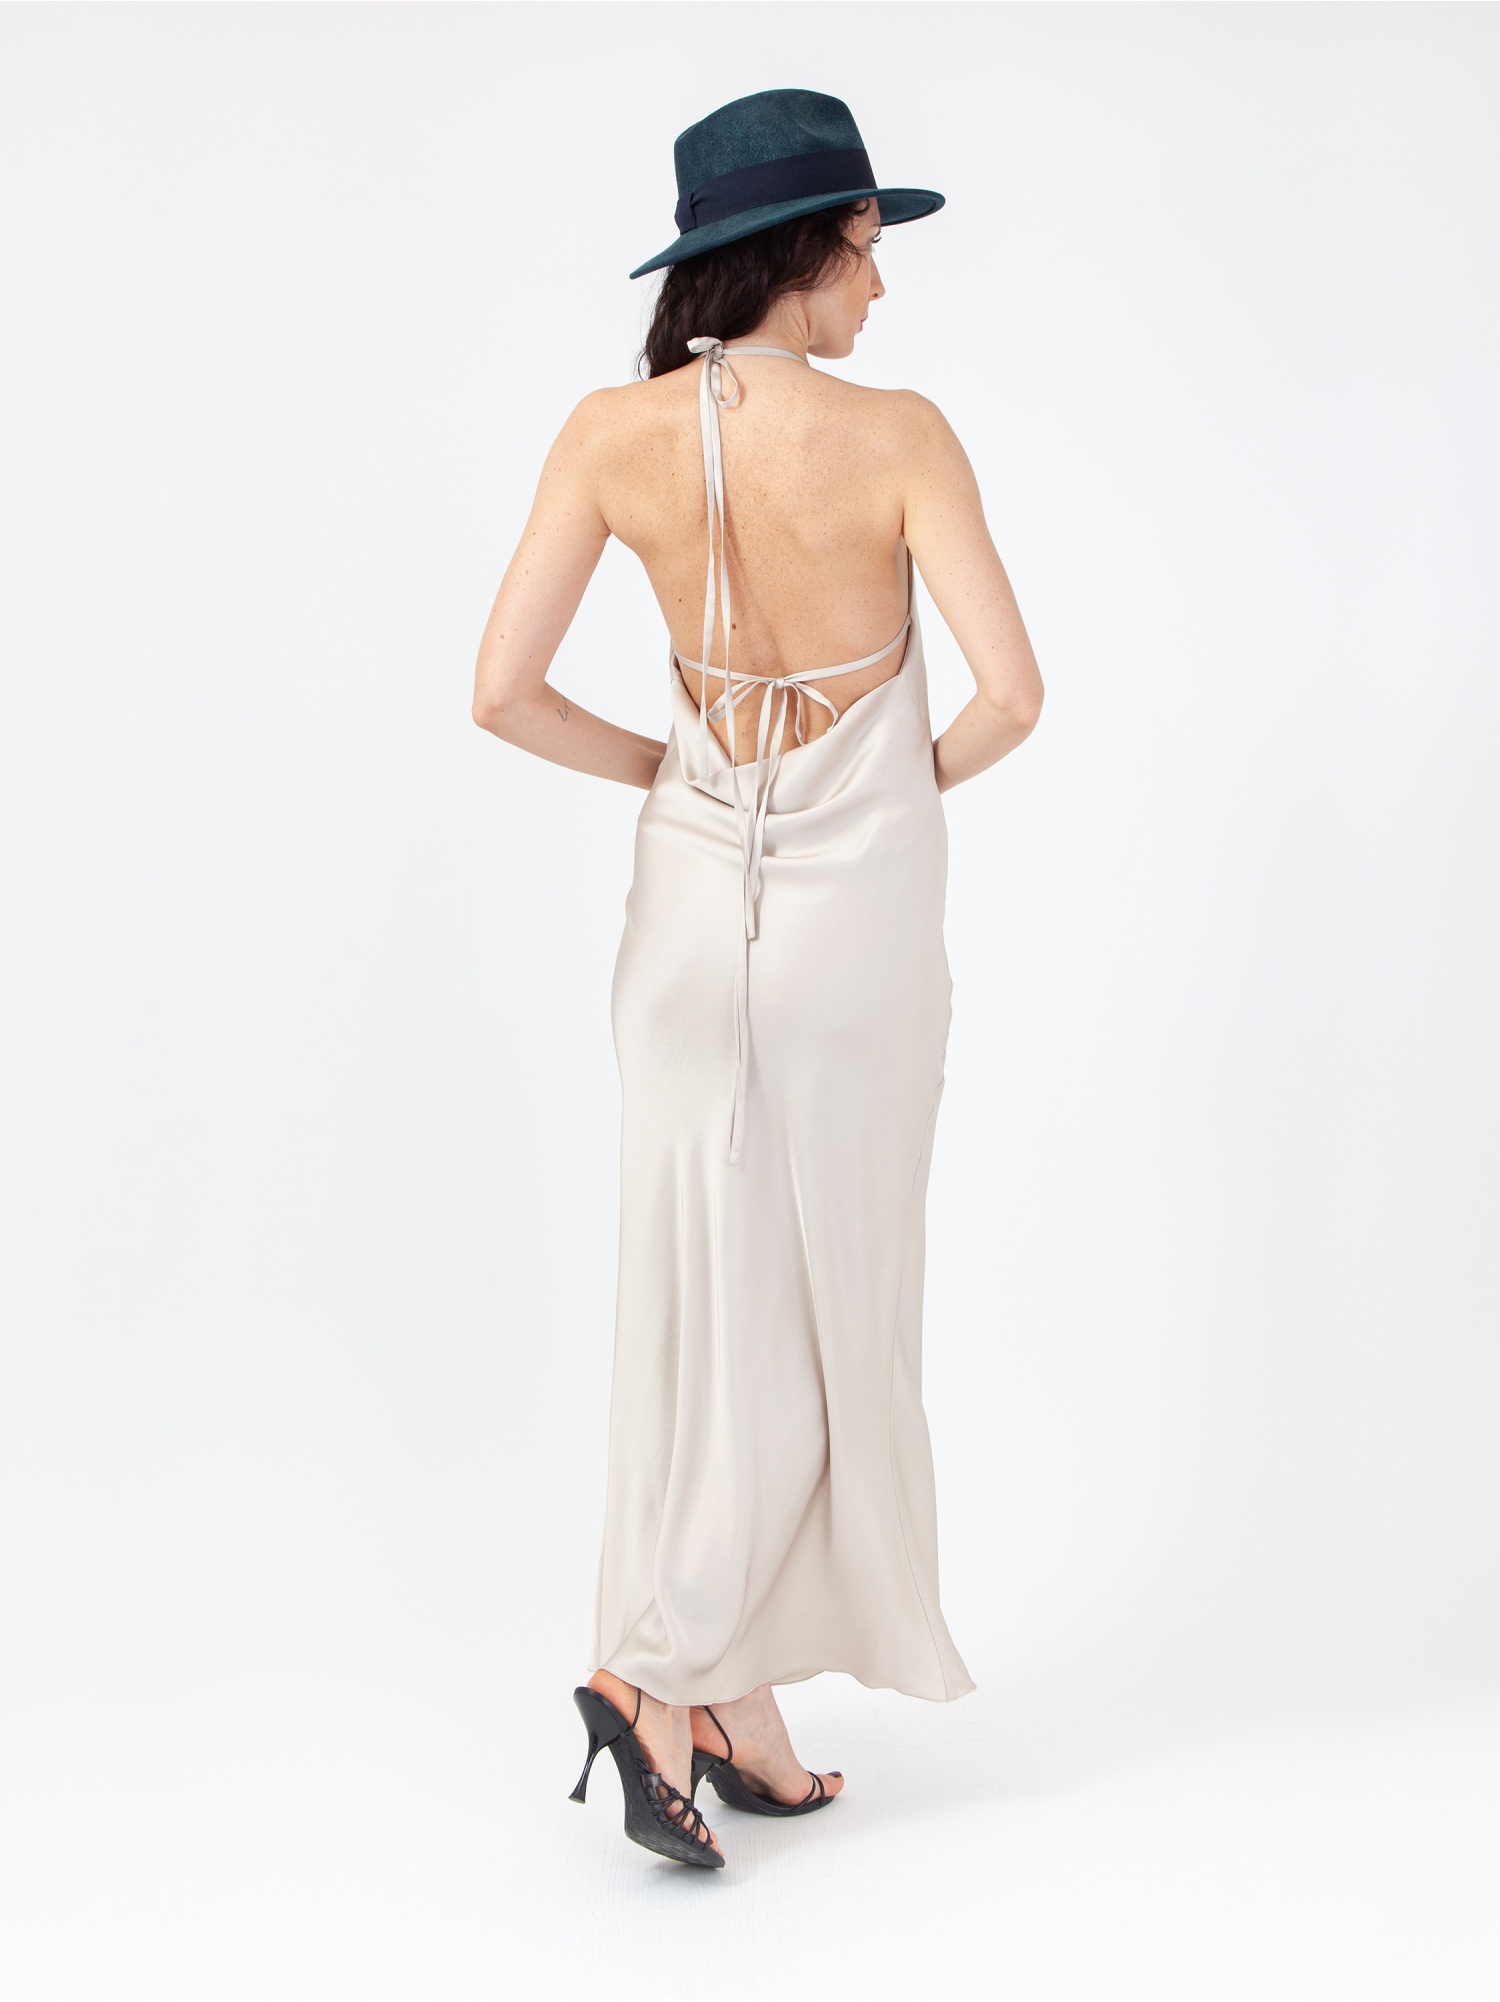 Women's shiny satin dress, long elegant ivory dress, sleeveless, with laces and back out. Champagne colour. 100% viscose, made in Italy. Buy  online!